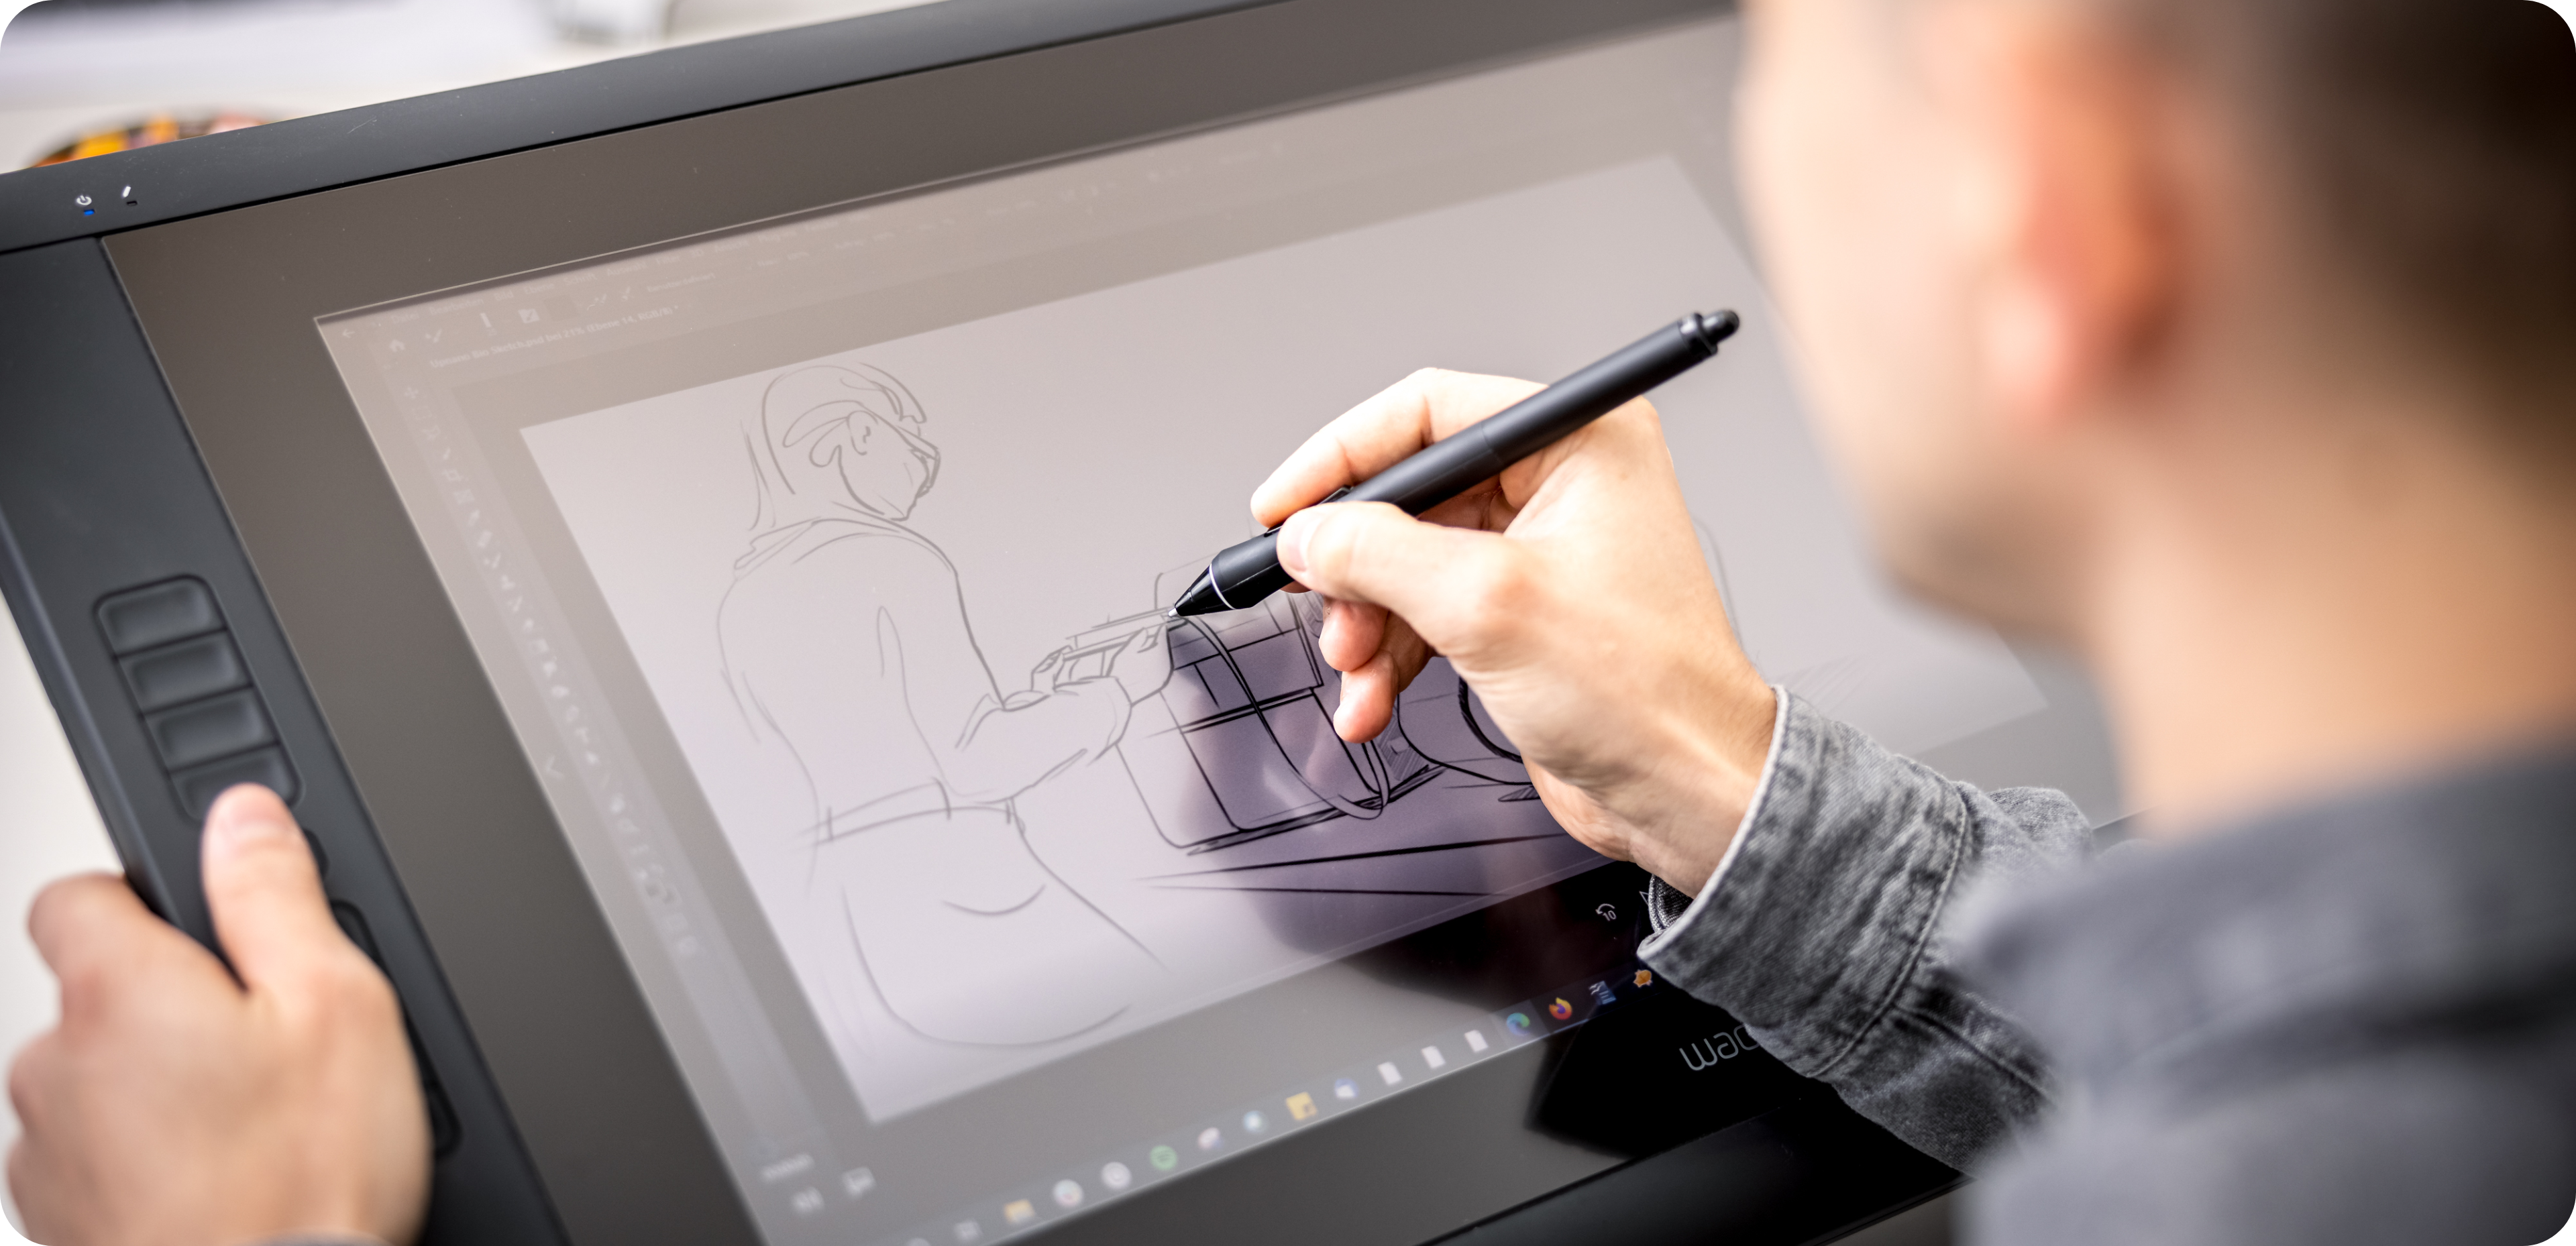 Michael designing on a wacom tablet | industrial & product design Vienna